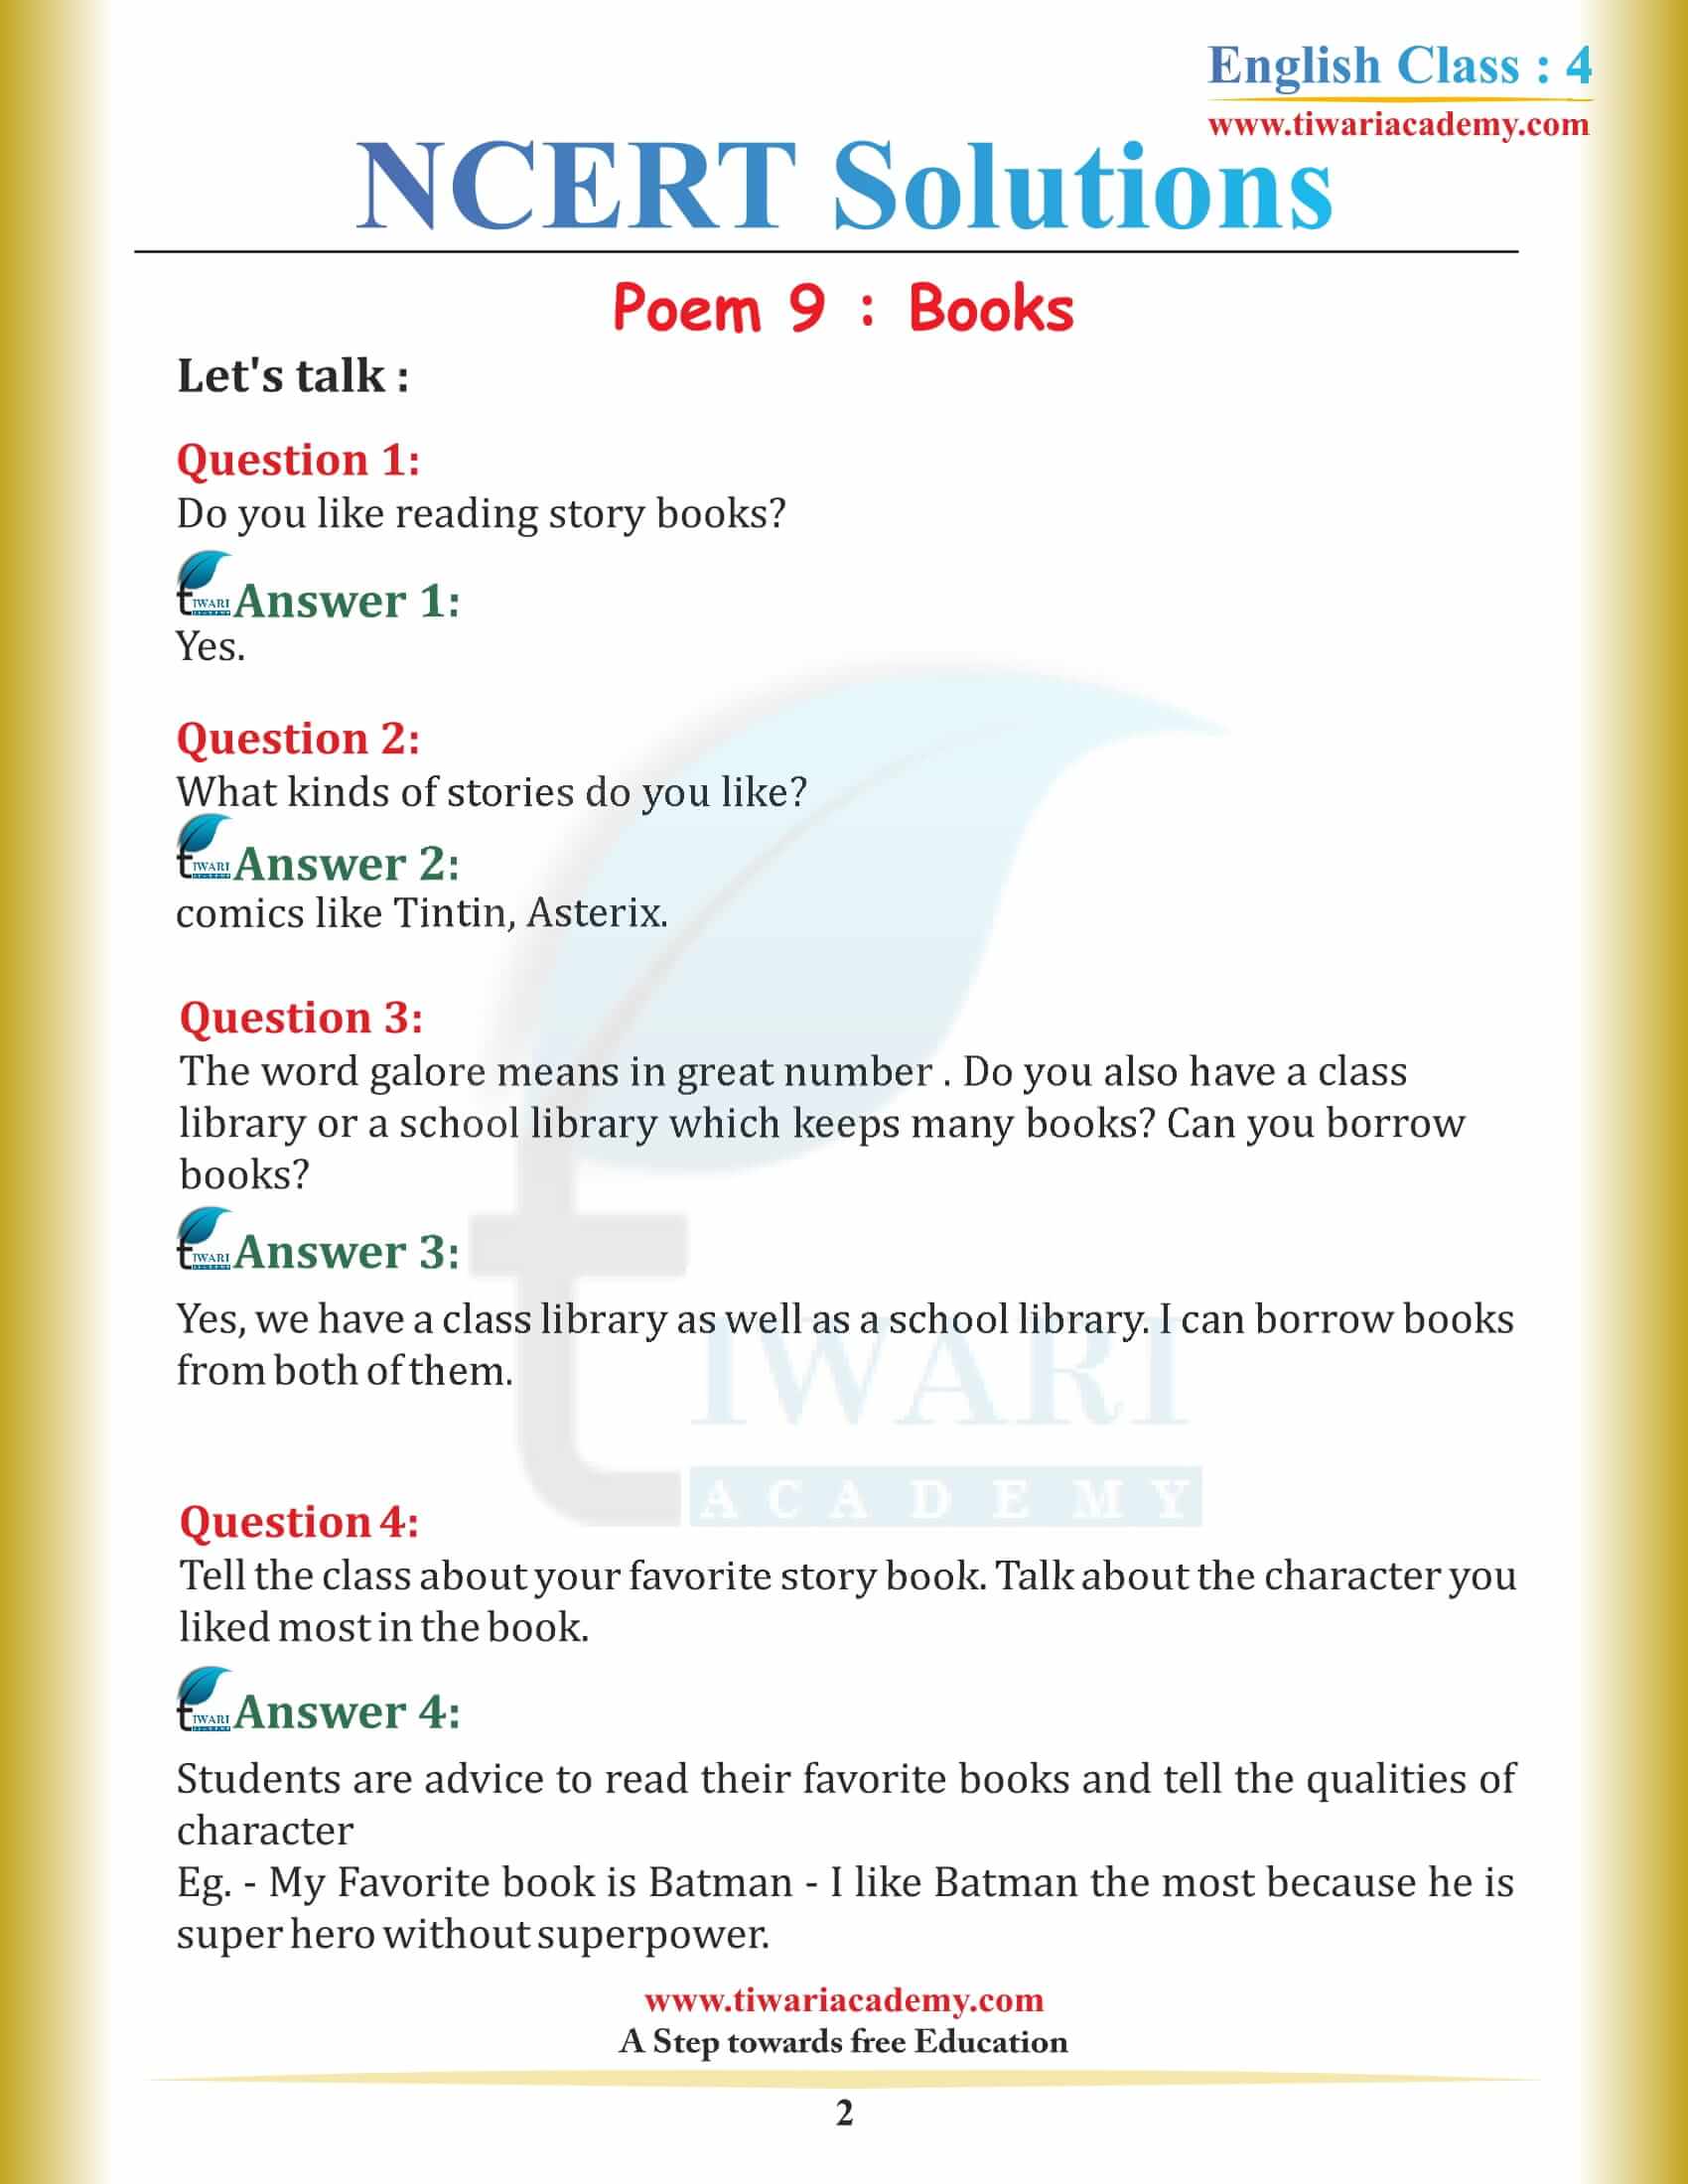 NCERT Solutions for Class 4 English Unit 9